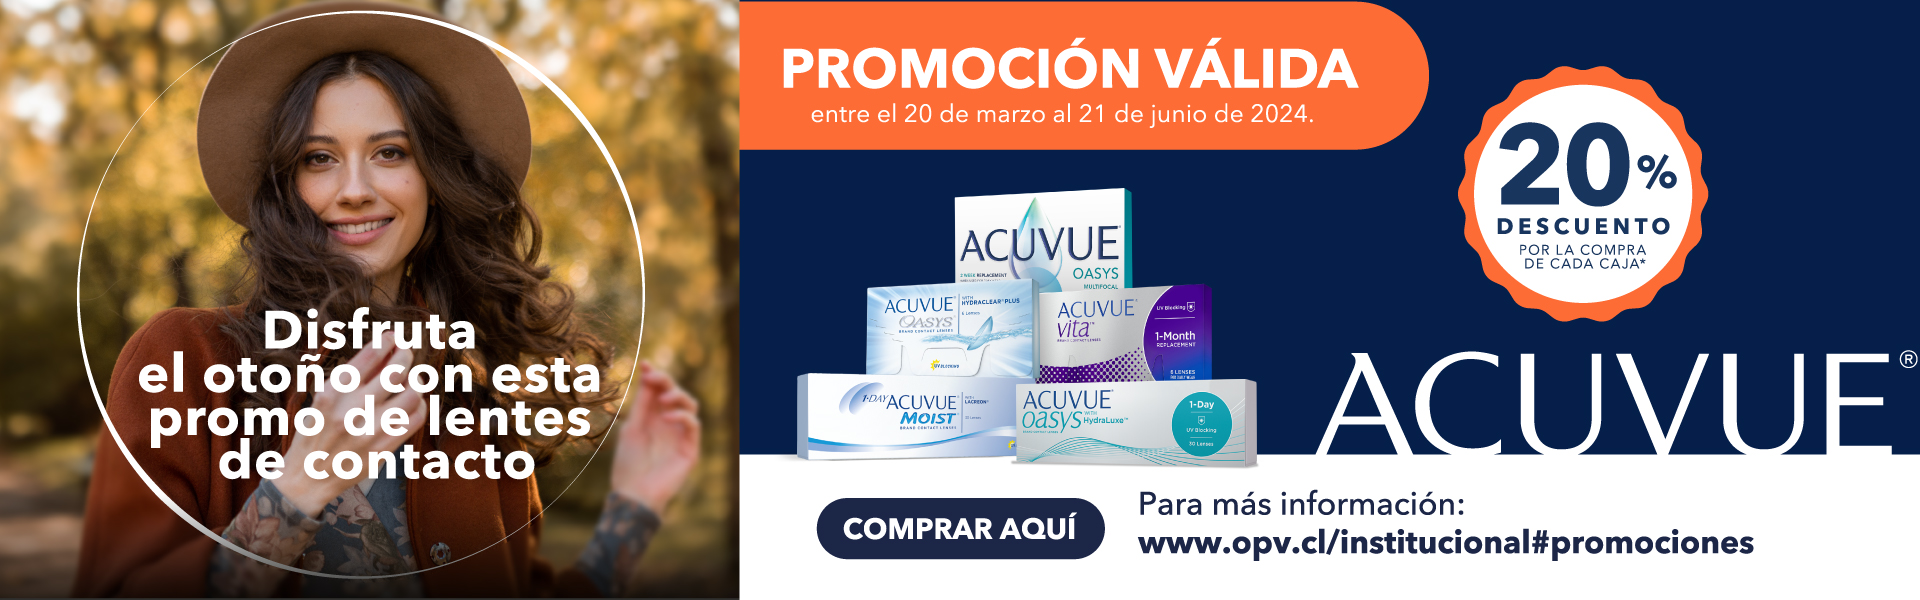 2-Acuvue